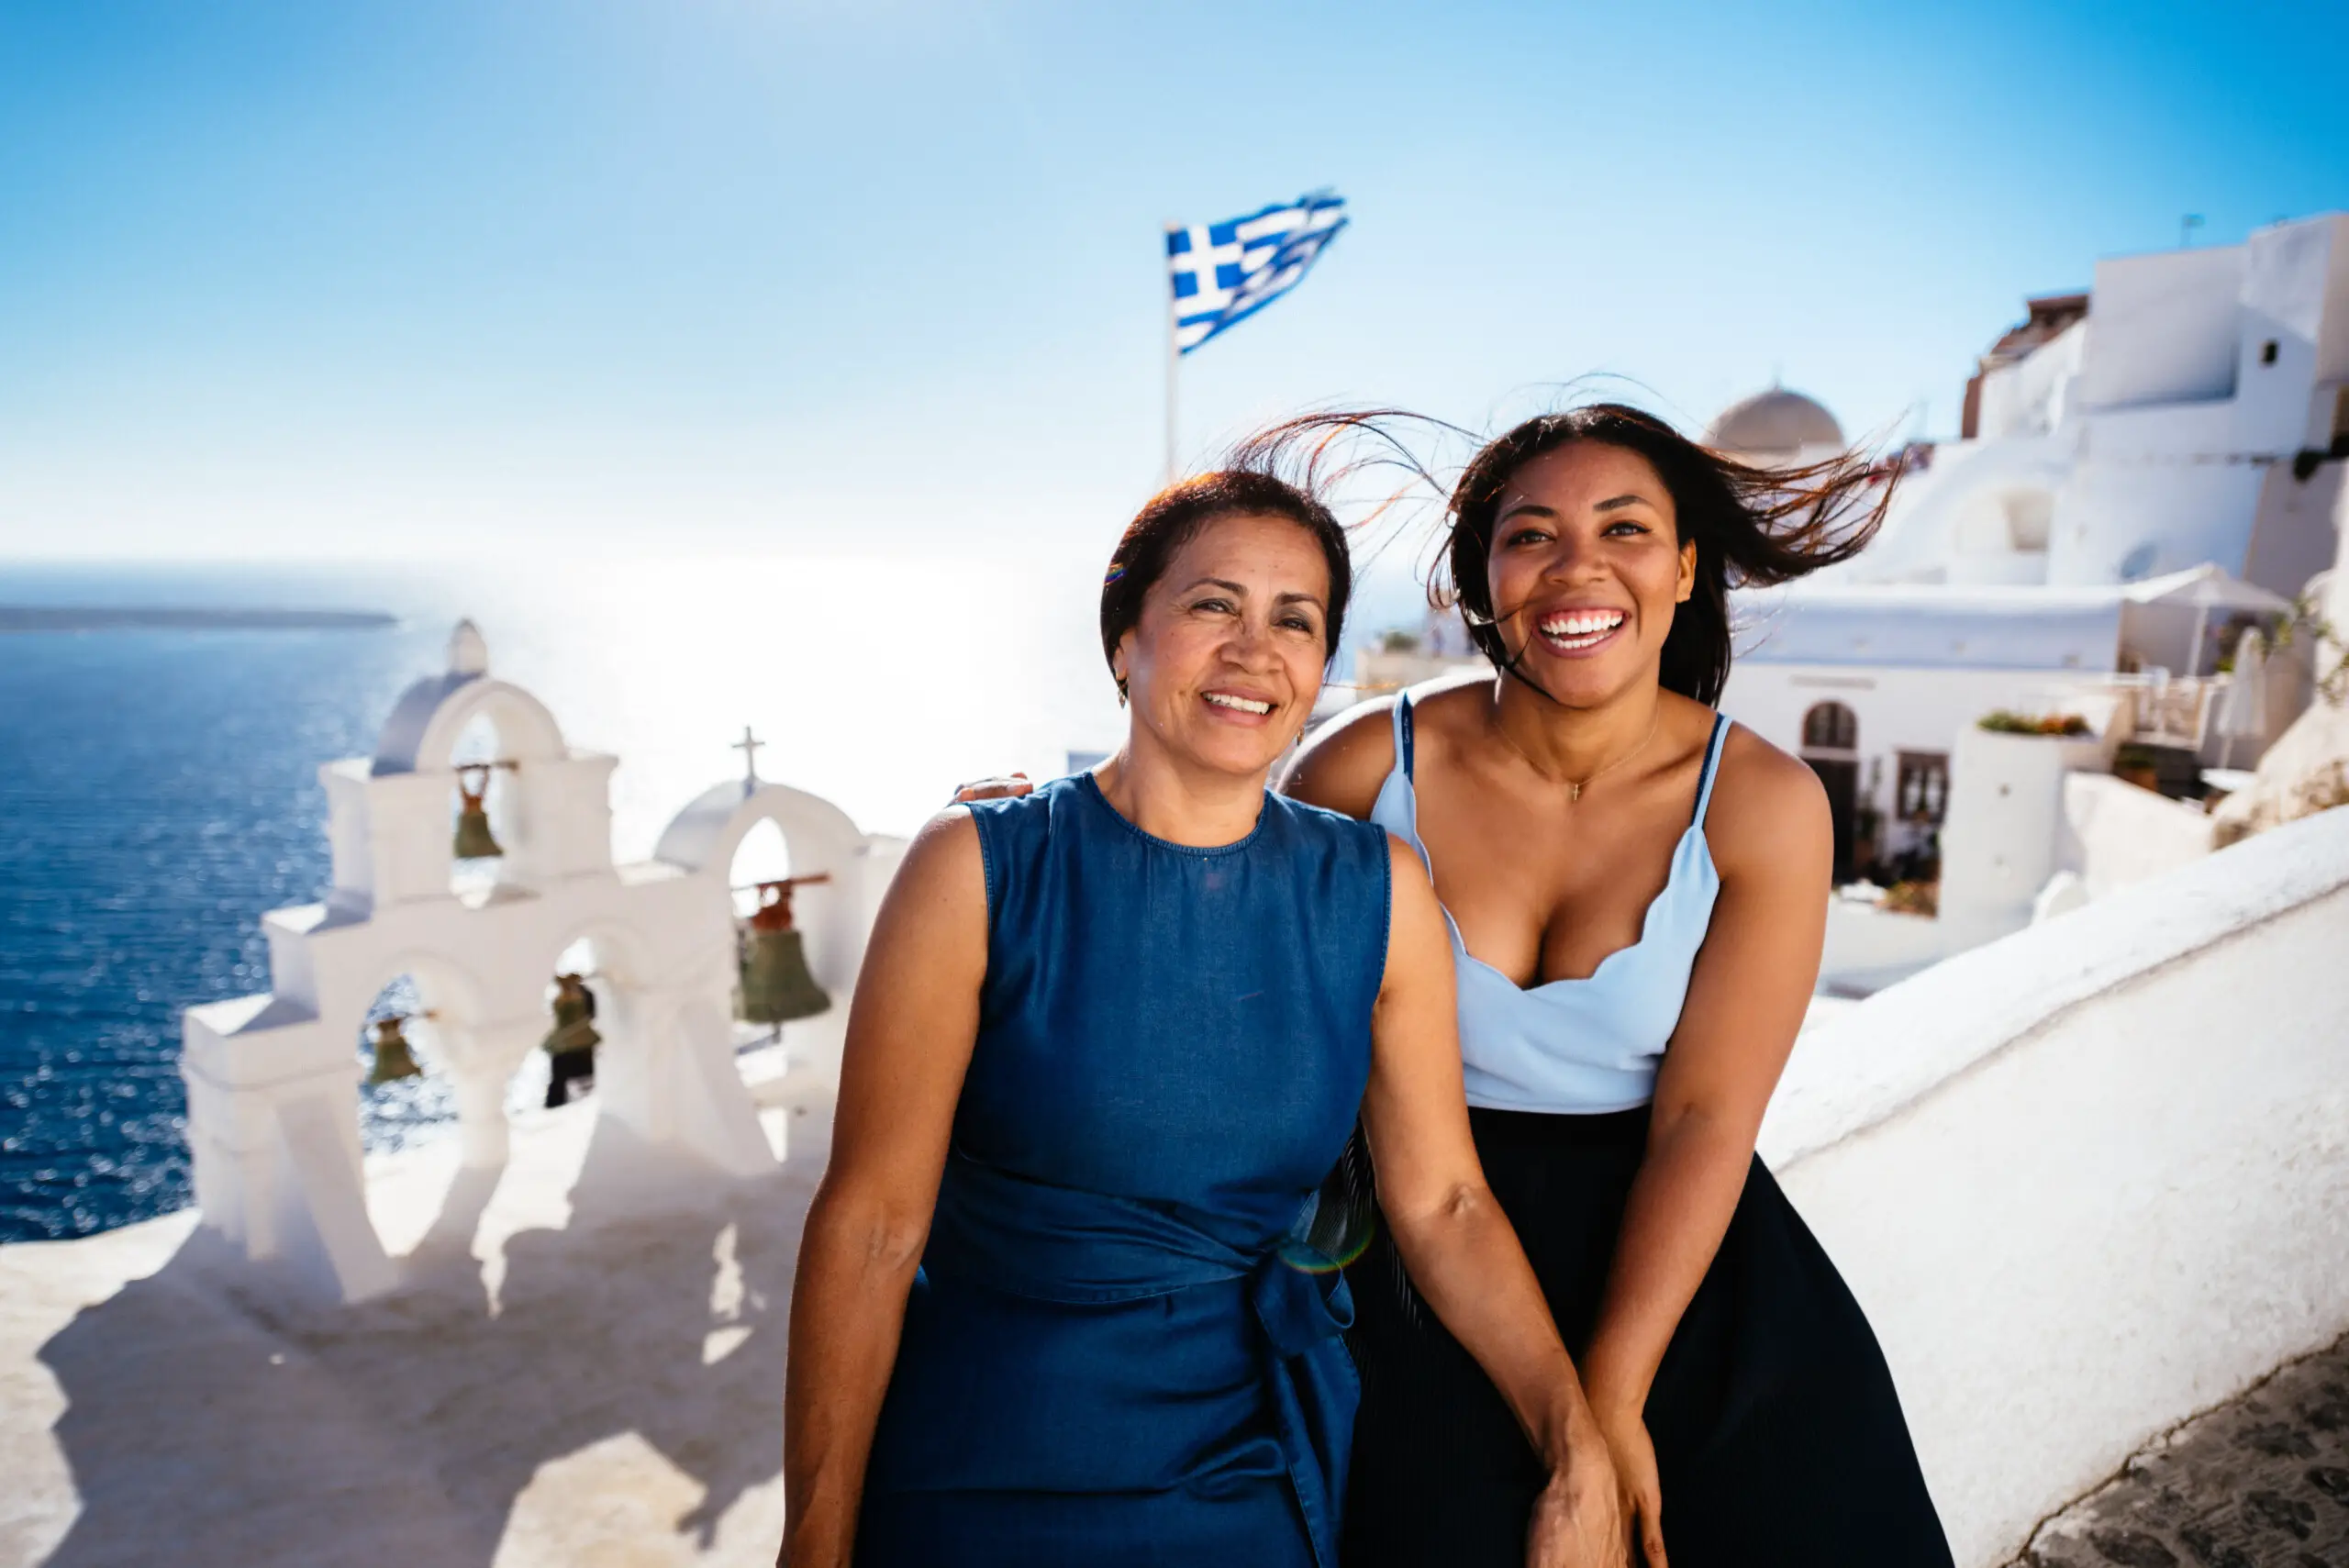 Mom and Daughter's photoshoot by Nikola, Localgrapher in Santorini